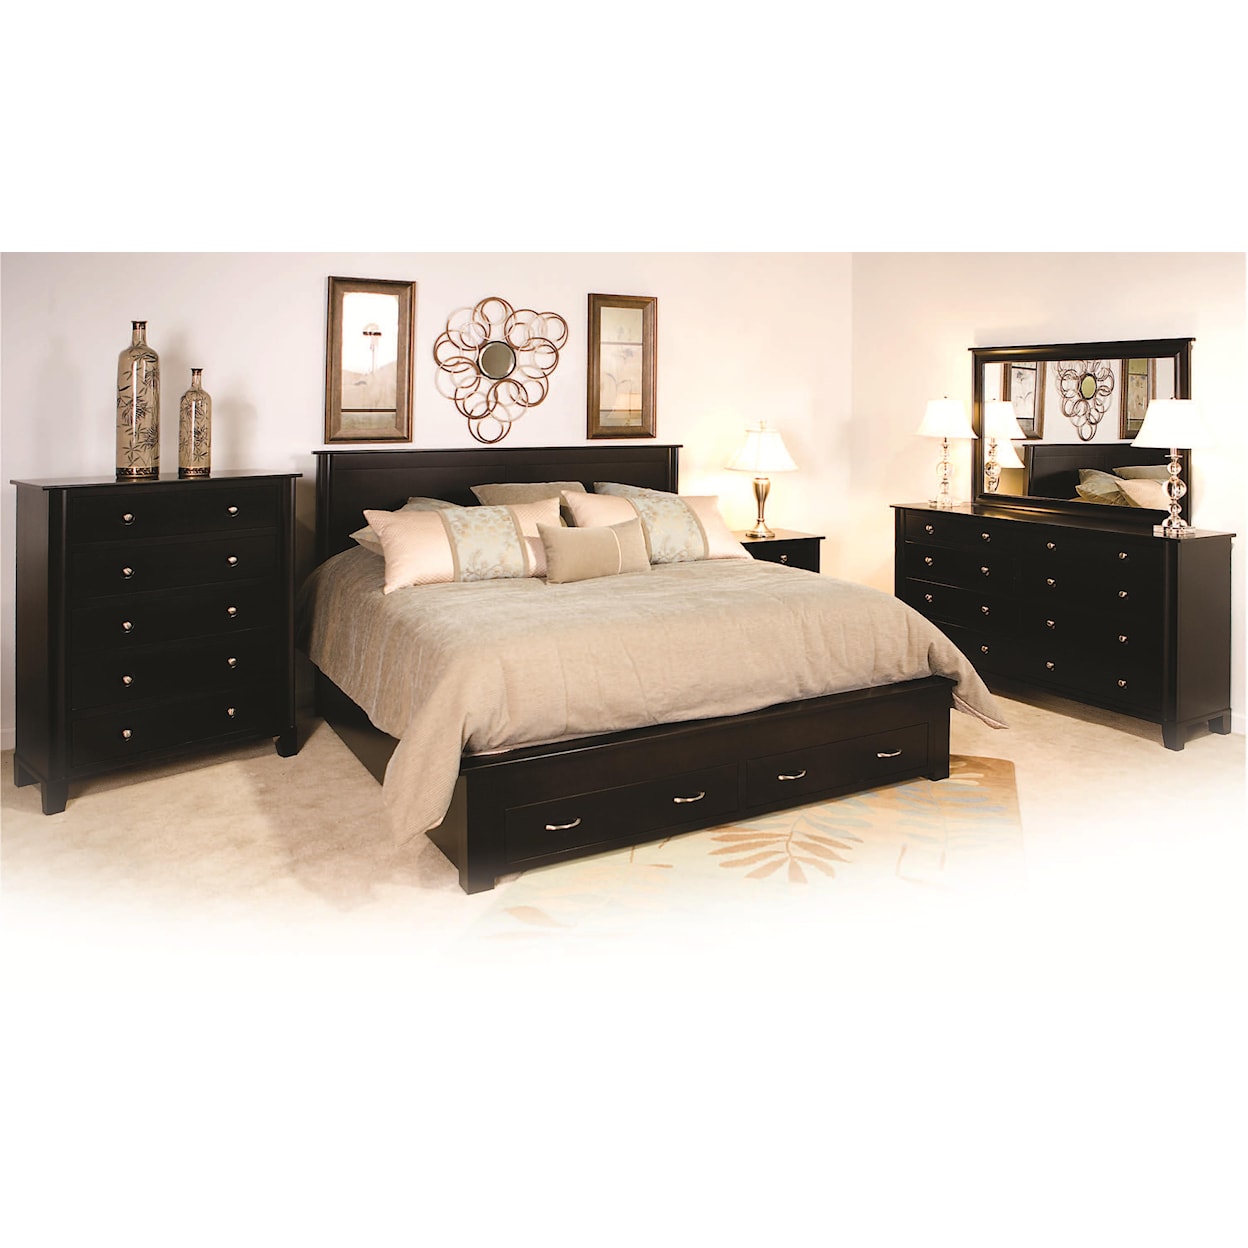 Daniel's Amish Cosmopolitan Frame Bed with 2 Footboard Drawers